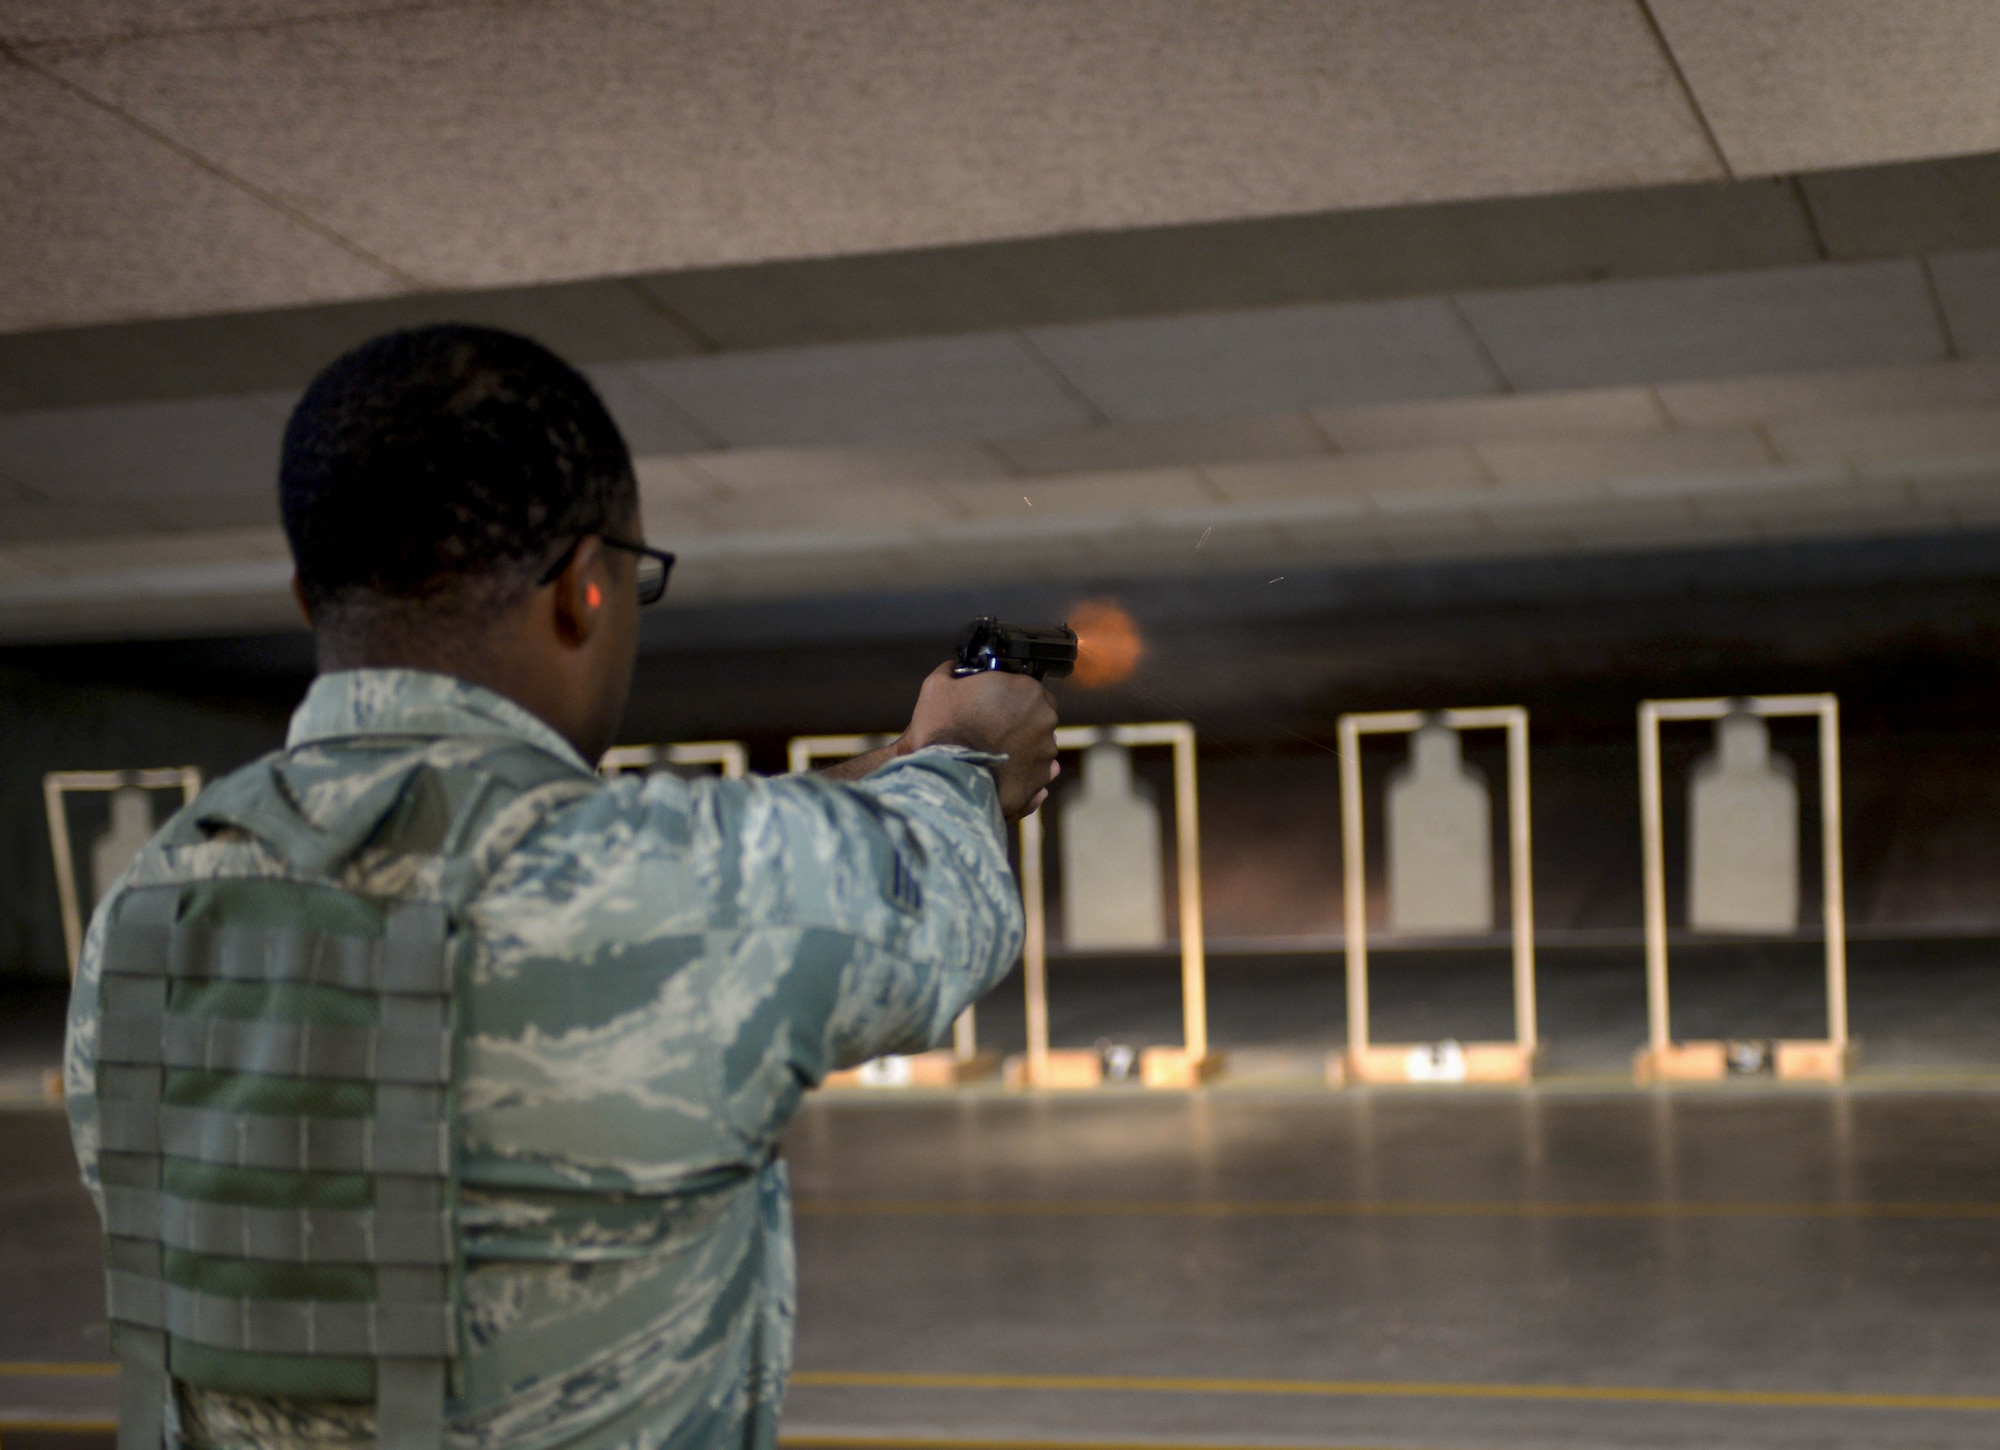 Senior Airman Tijon North, a response force leader assigned to the 28th Security Forces Squadron, fires an M9 pistol at the Combat Arms Training and Maintenance firing range at Ellsworth Air Force Base, S.D., Oct. 6, 2016. Ellsworth’s CATM has trained more than 2,000 Airmen this year with more than 500 sent downrange. (U.S. Air Force photo by Airman 1st Class Donald C. Knechtel)